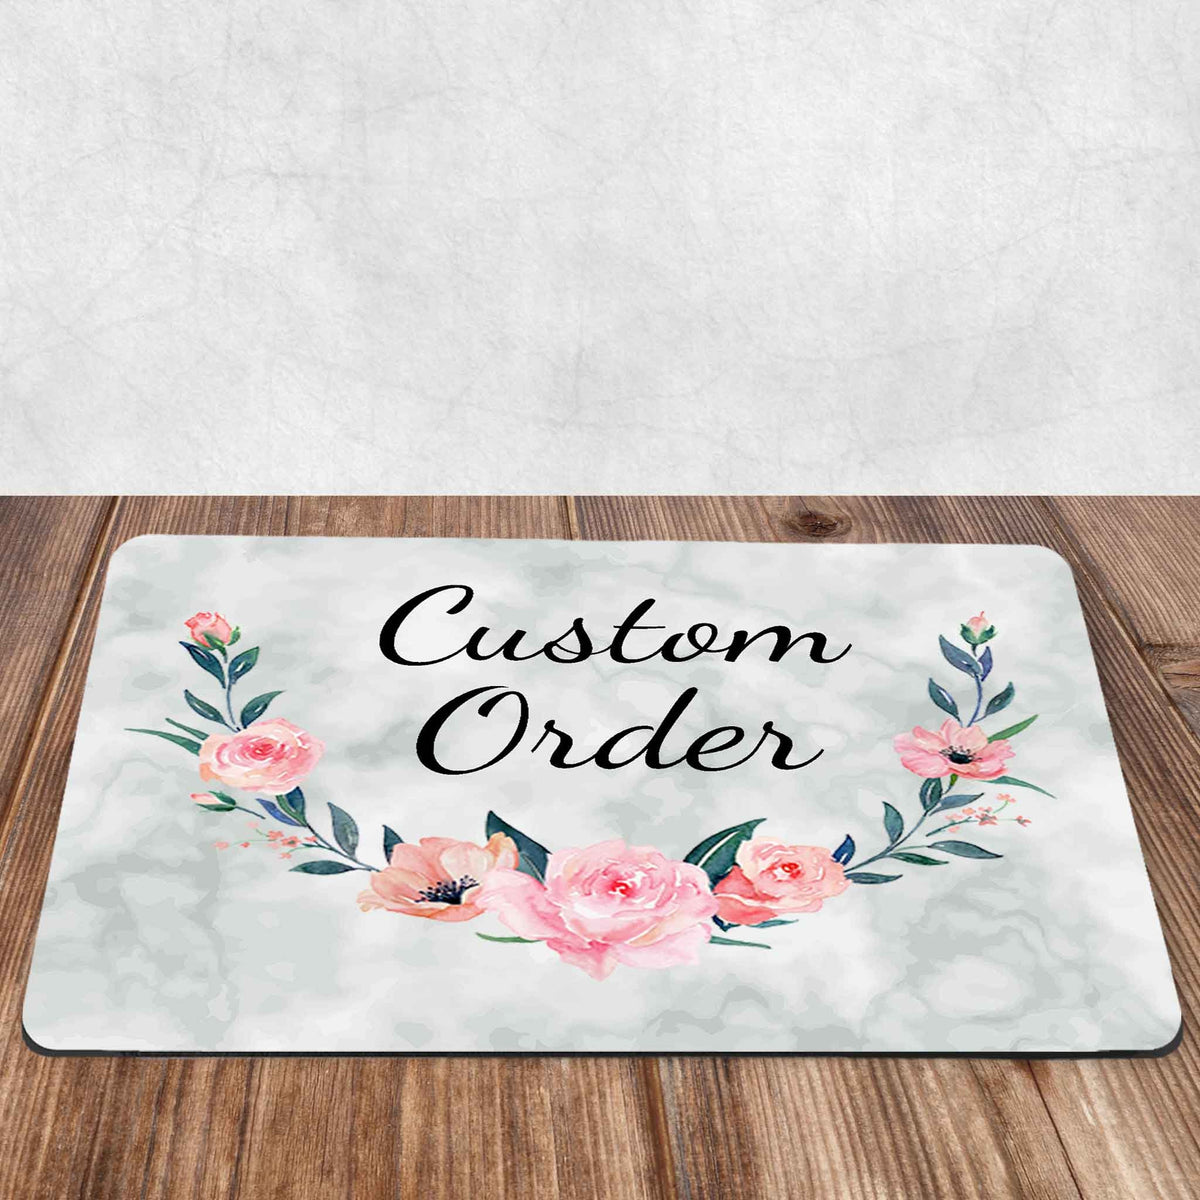 Custom Placemats | Personalized Dining and Serving | Custom Order